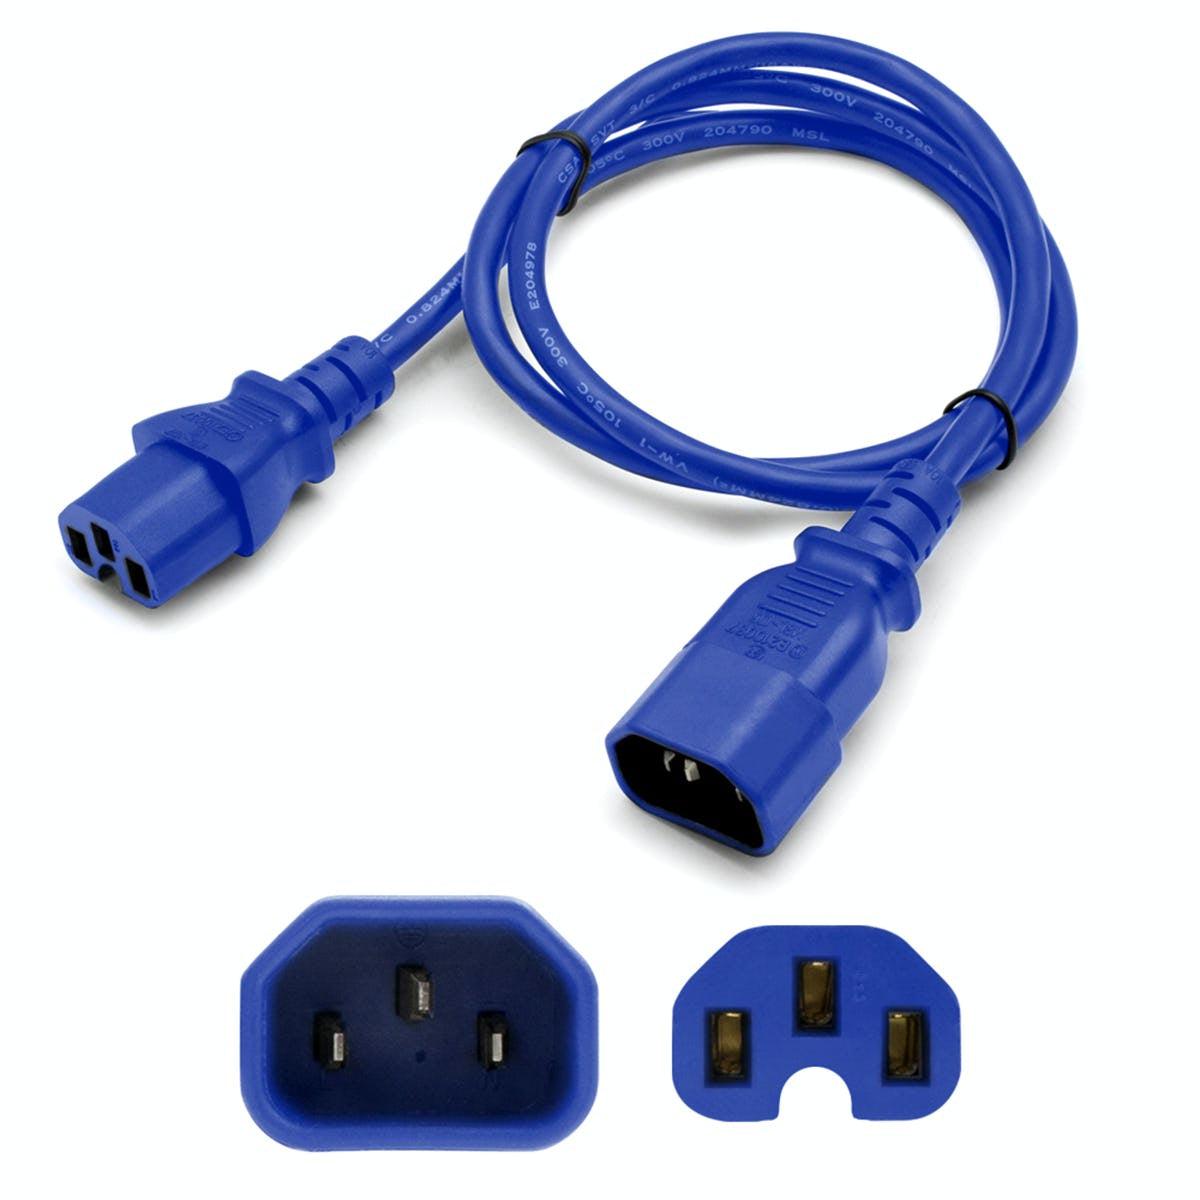 Addon Networks Add-C142C1514Awg3Ftbe Power Cable Blue 0.91 M C14 Coupler C15 Coupler